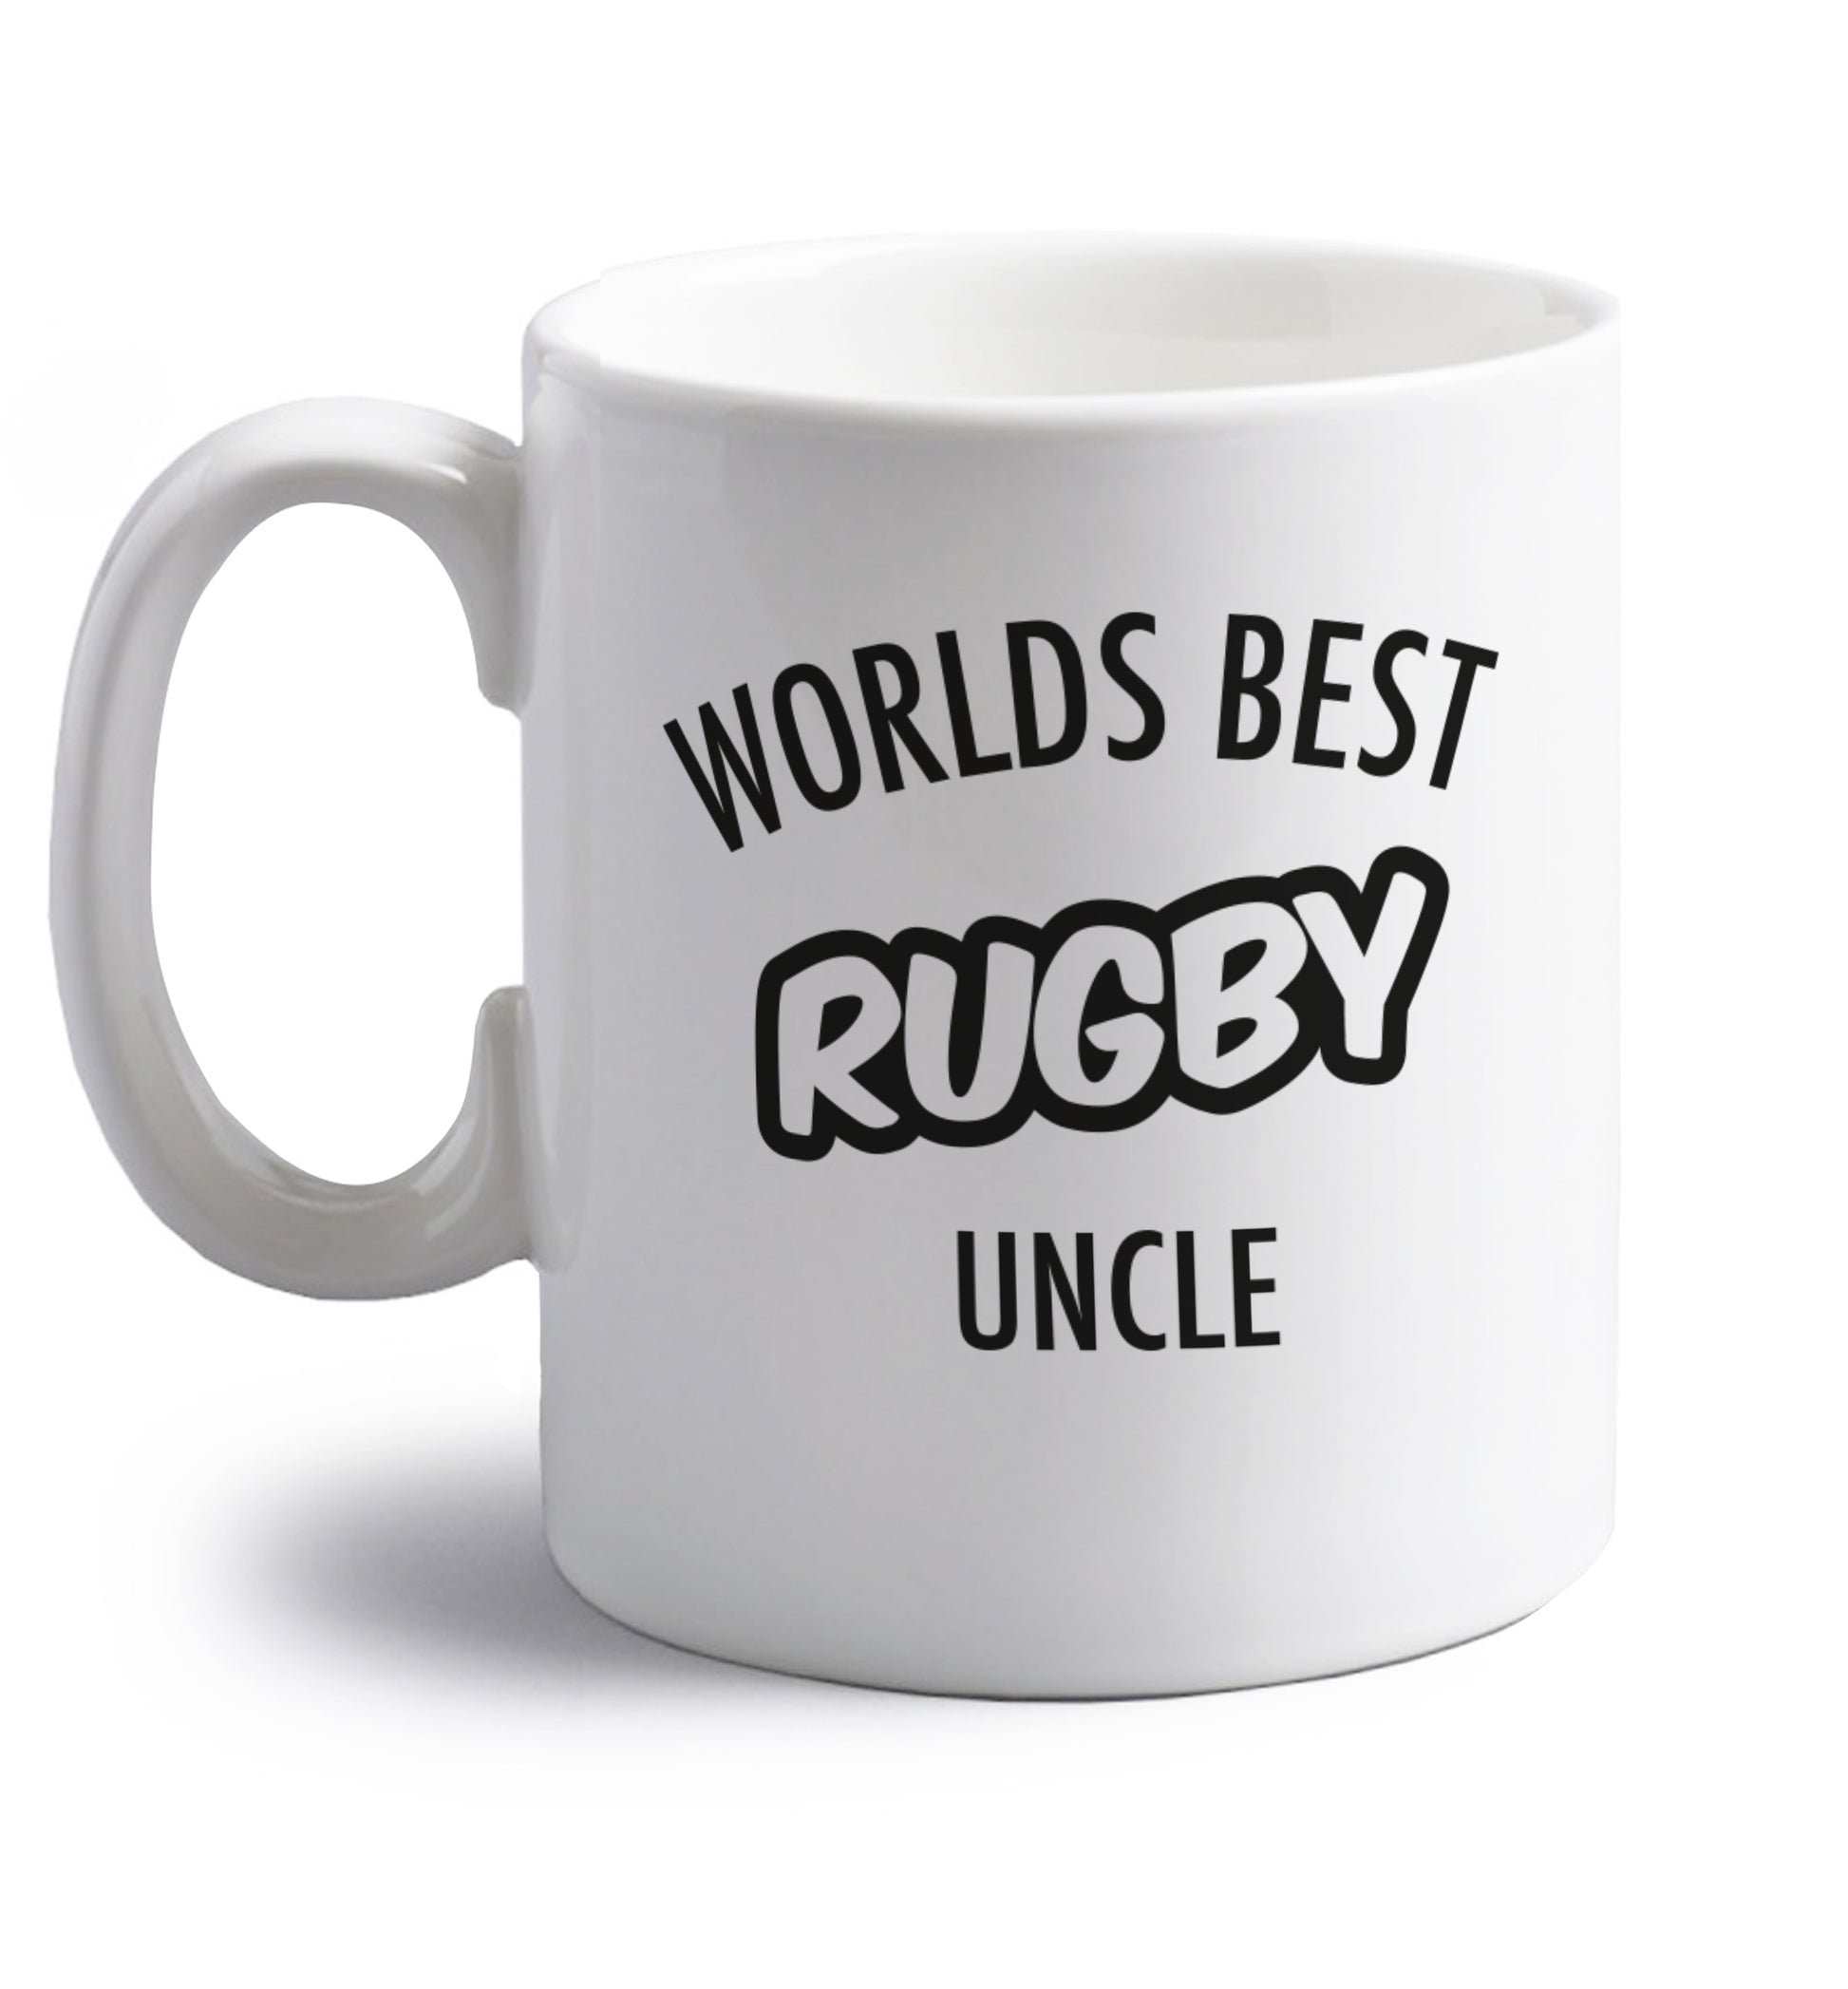 Worlds best rugby uncle right handed white ceramic mug 